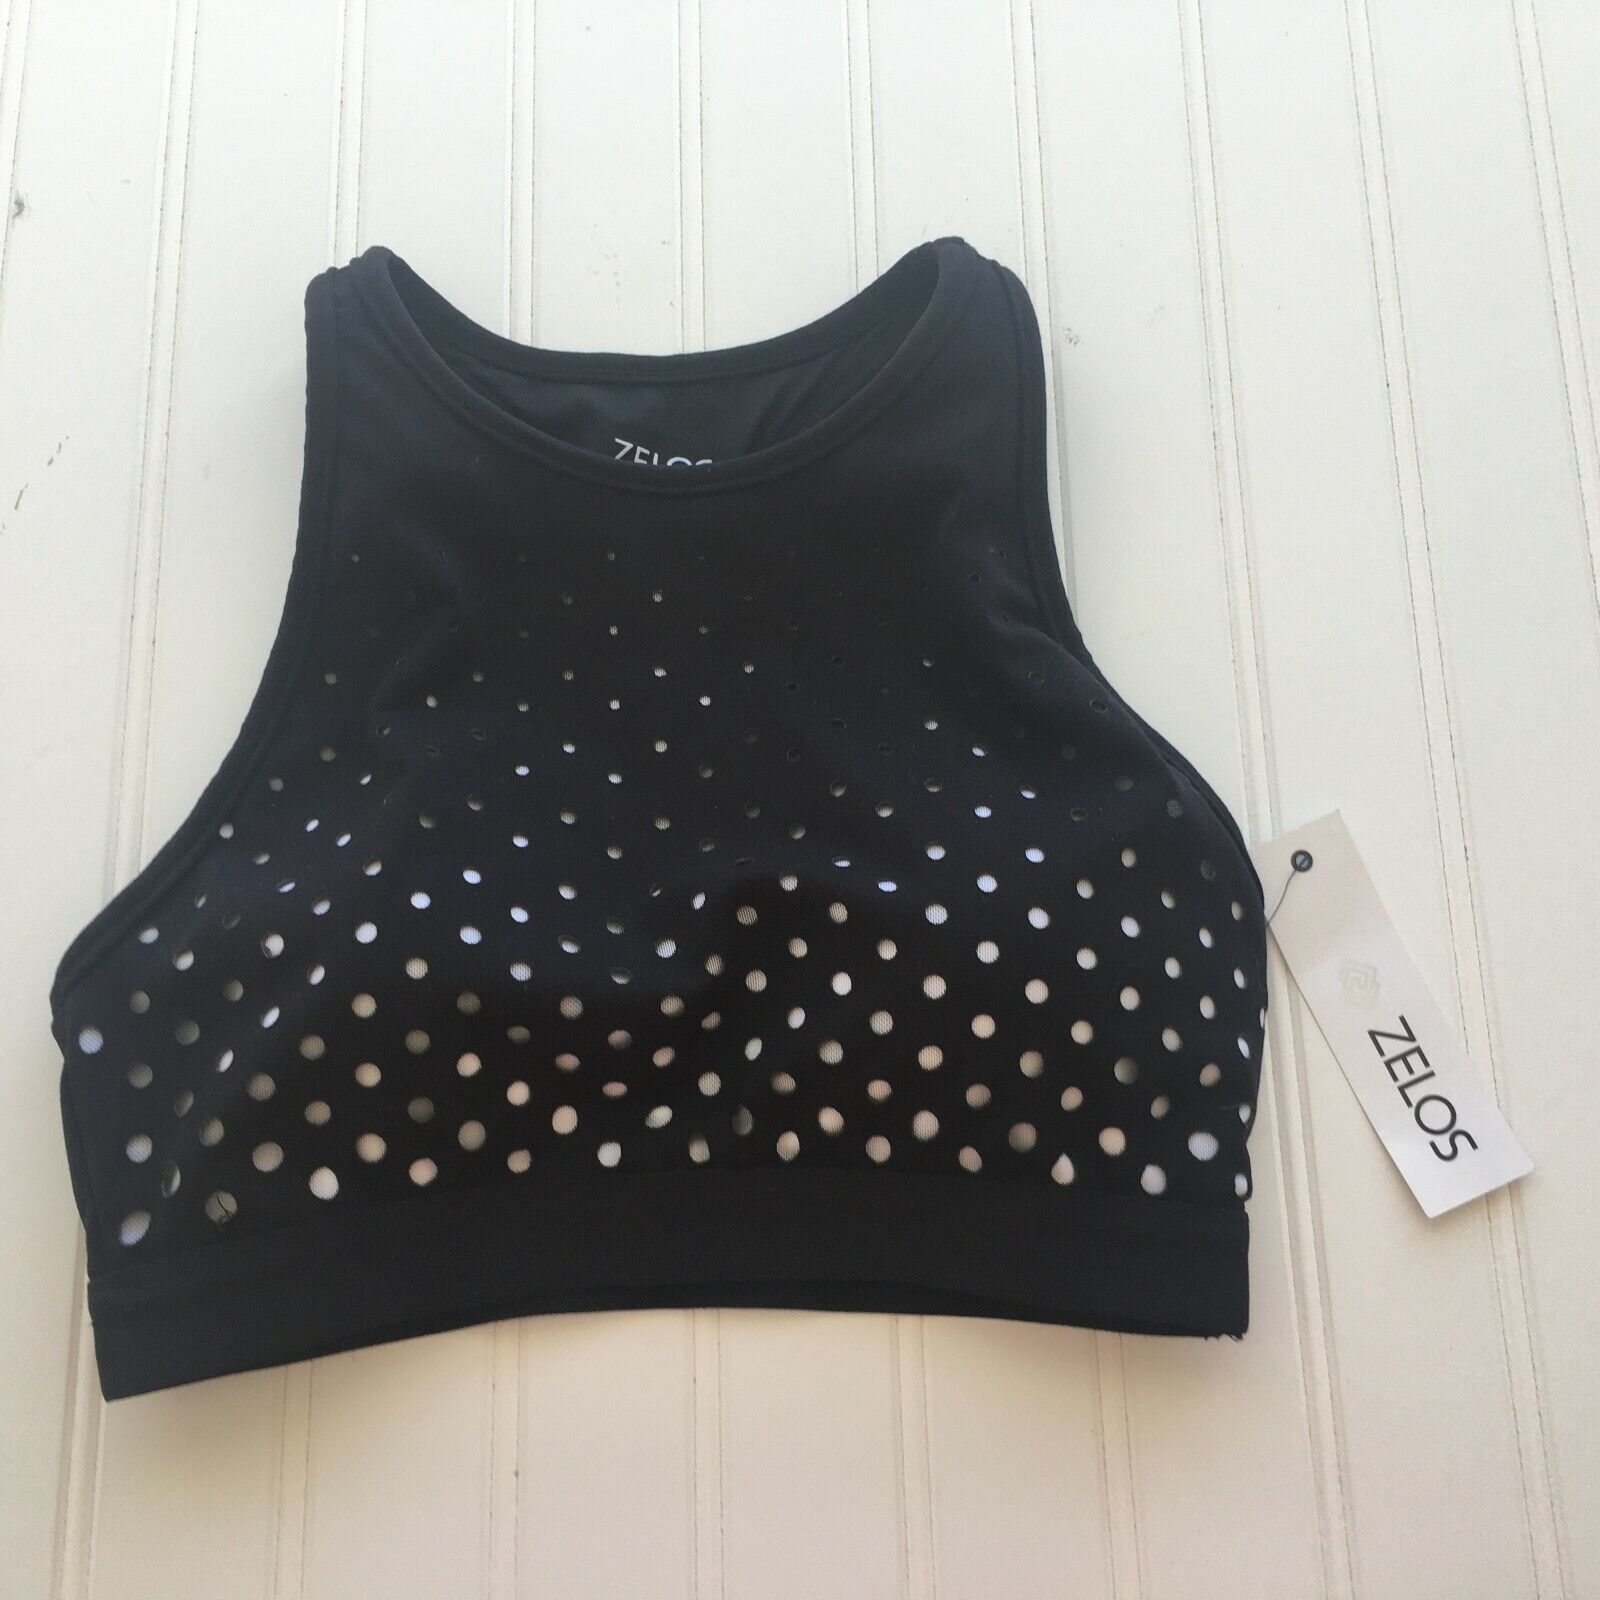 Zelos Black and White Racerback Sports Bra and similar items